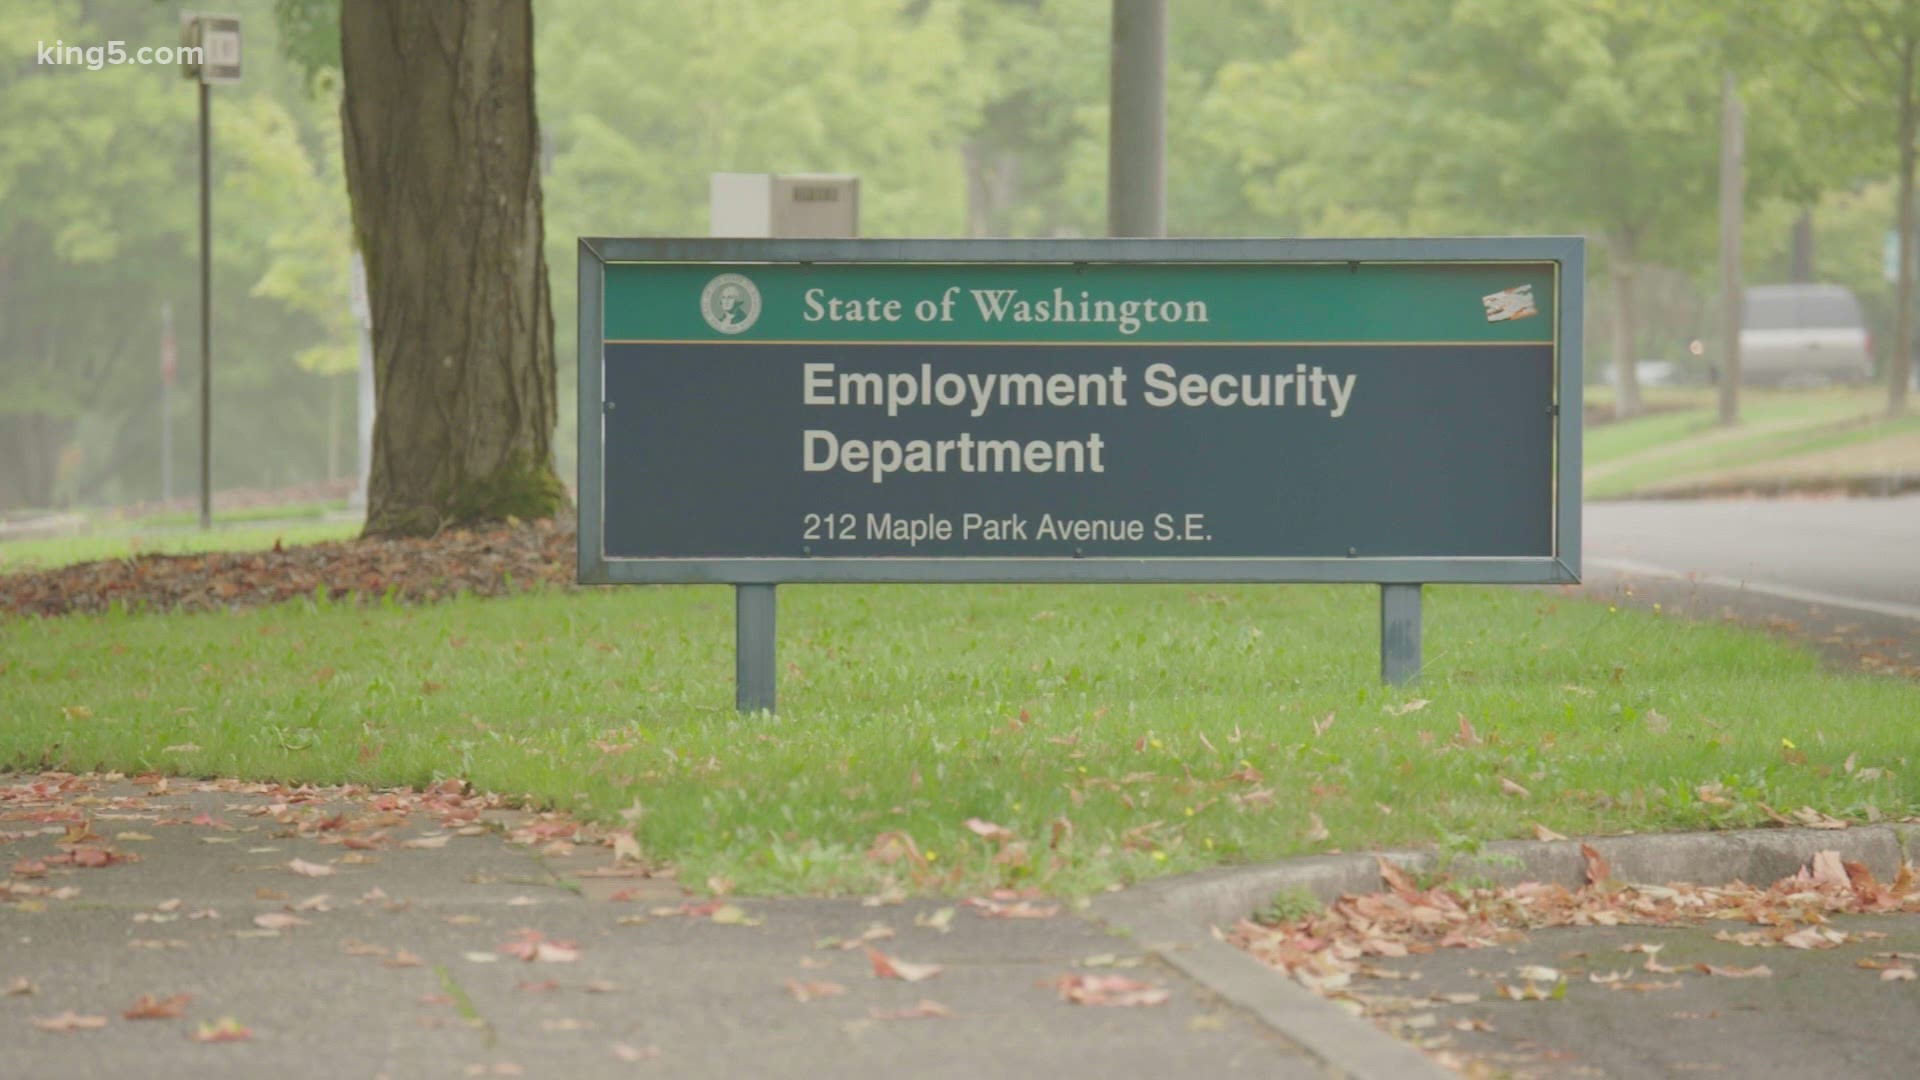 Records obtained by KING 5 Investigators show the Employment Security Department couldn’t stop fraud filed in stolen ID’s of its own employees.